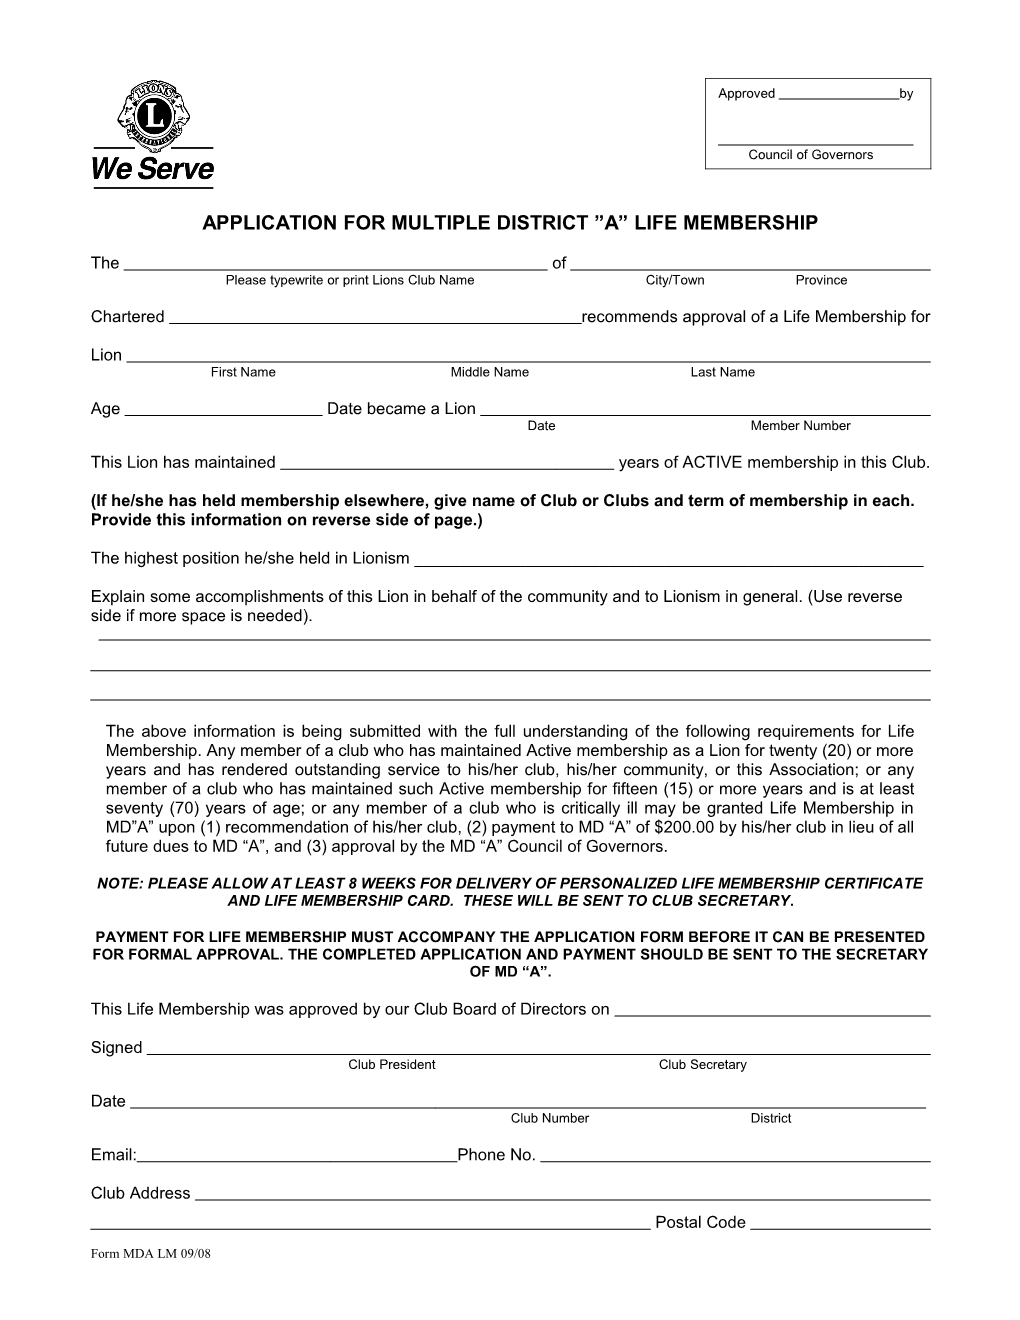 Application for Multiple District a Life Membership